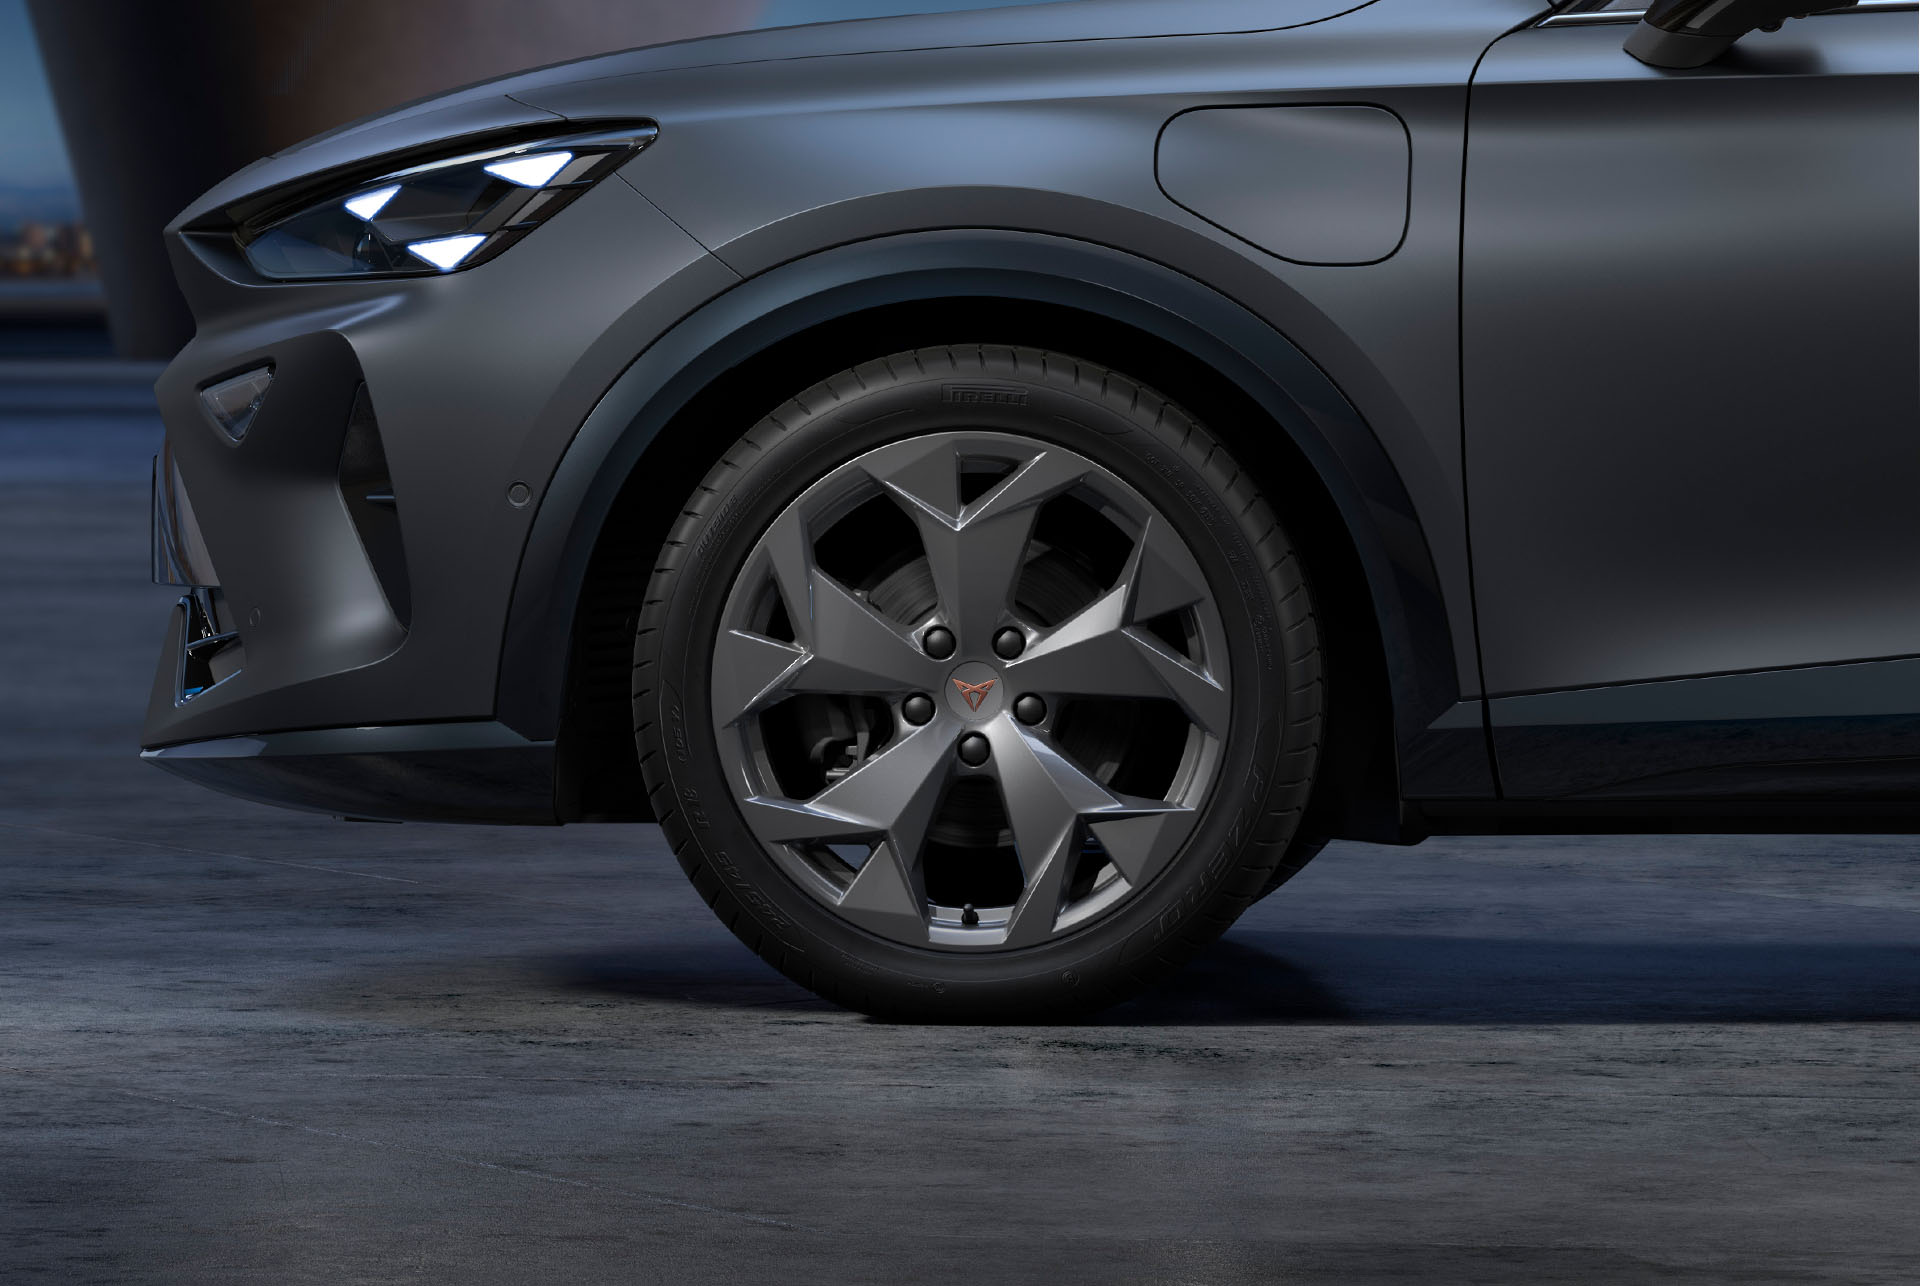 New tempest silver CUPRA Formentor 2024 alloy car wheels and tyres with logo in the middle, LED headlights.